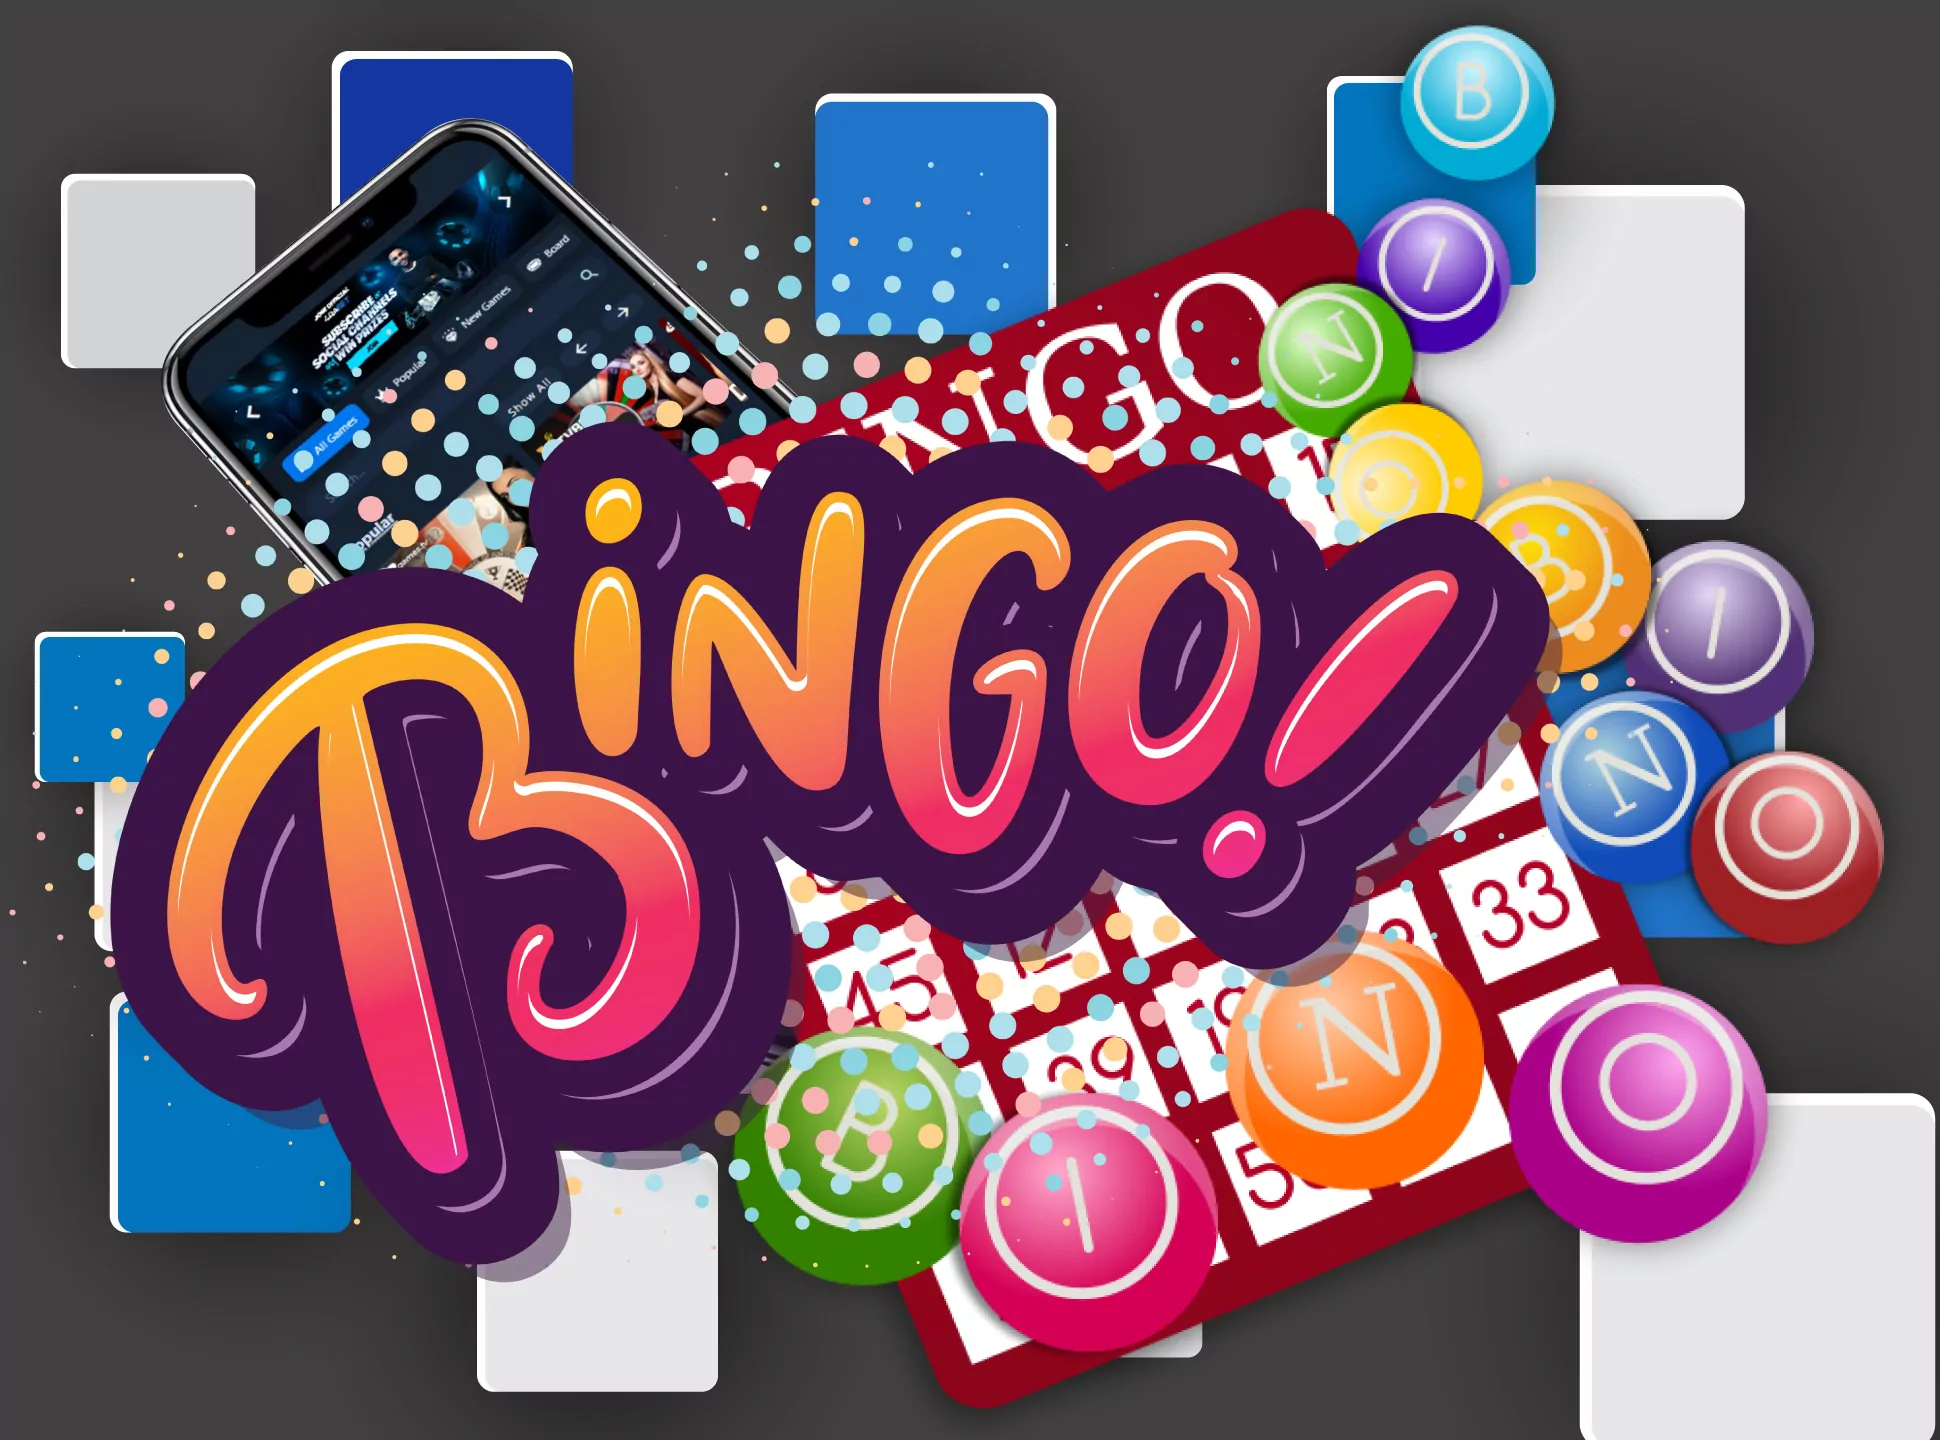 Play bingo games and test your luck.